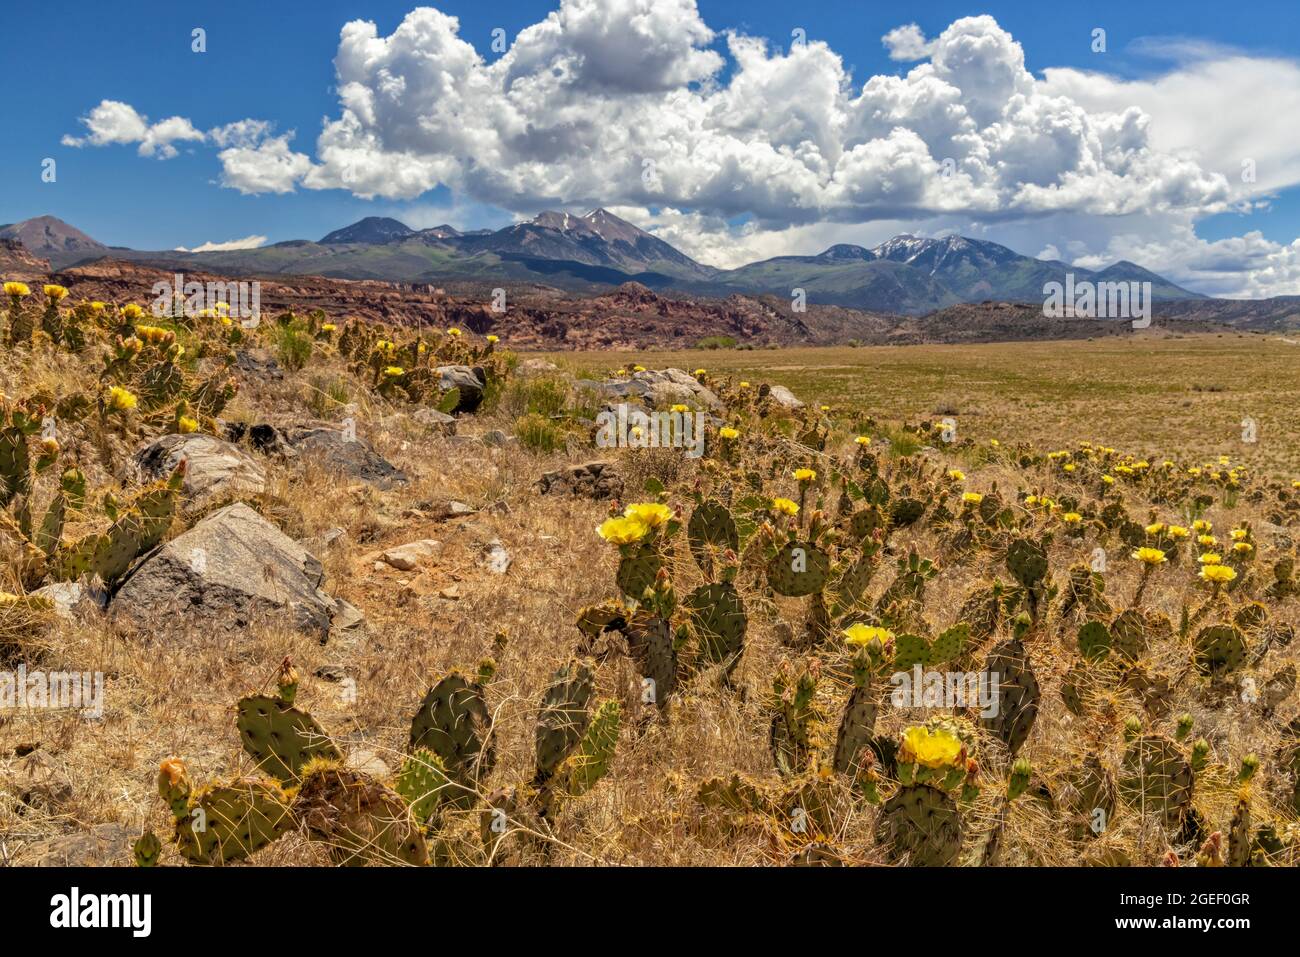 Pricky Pear Cactus on a small hill bloom with yellow flowers in front of the La Sal Mountains South of Moab Utah. Stock Photo